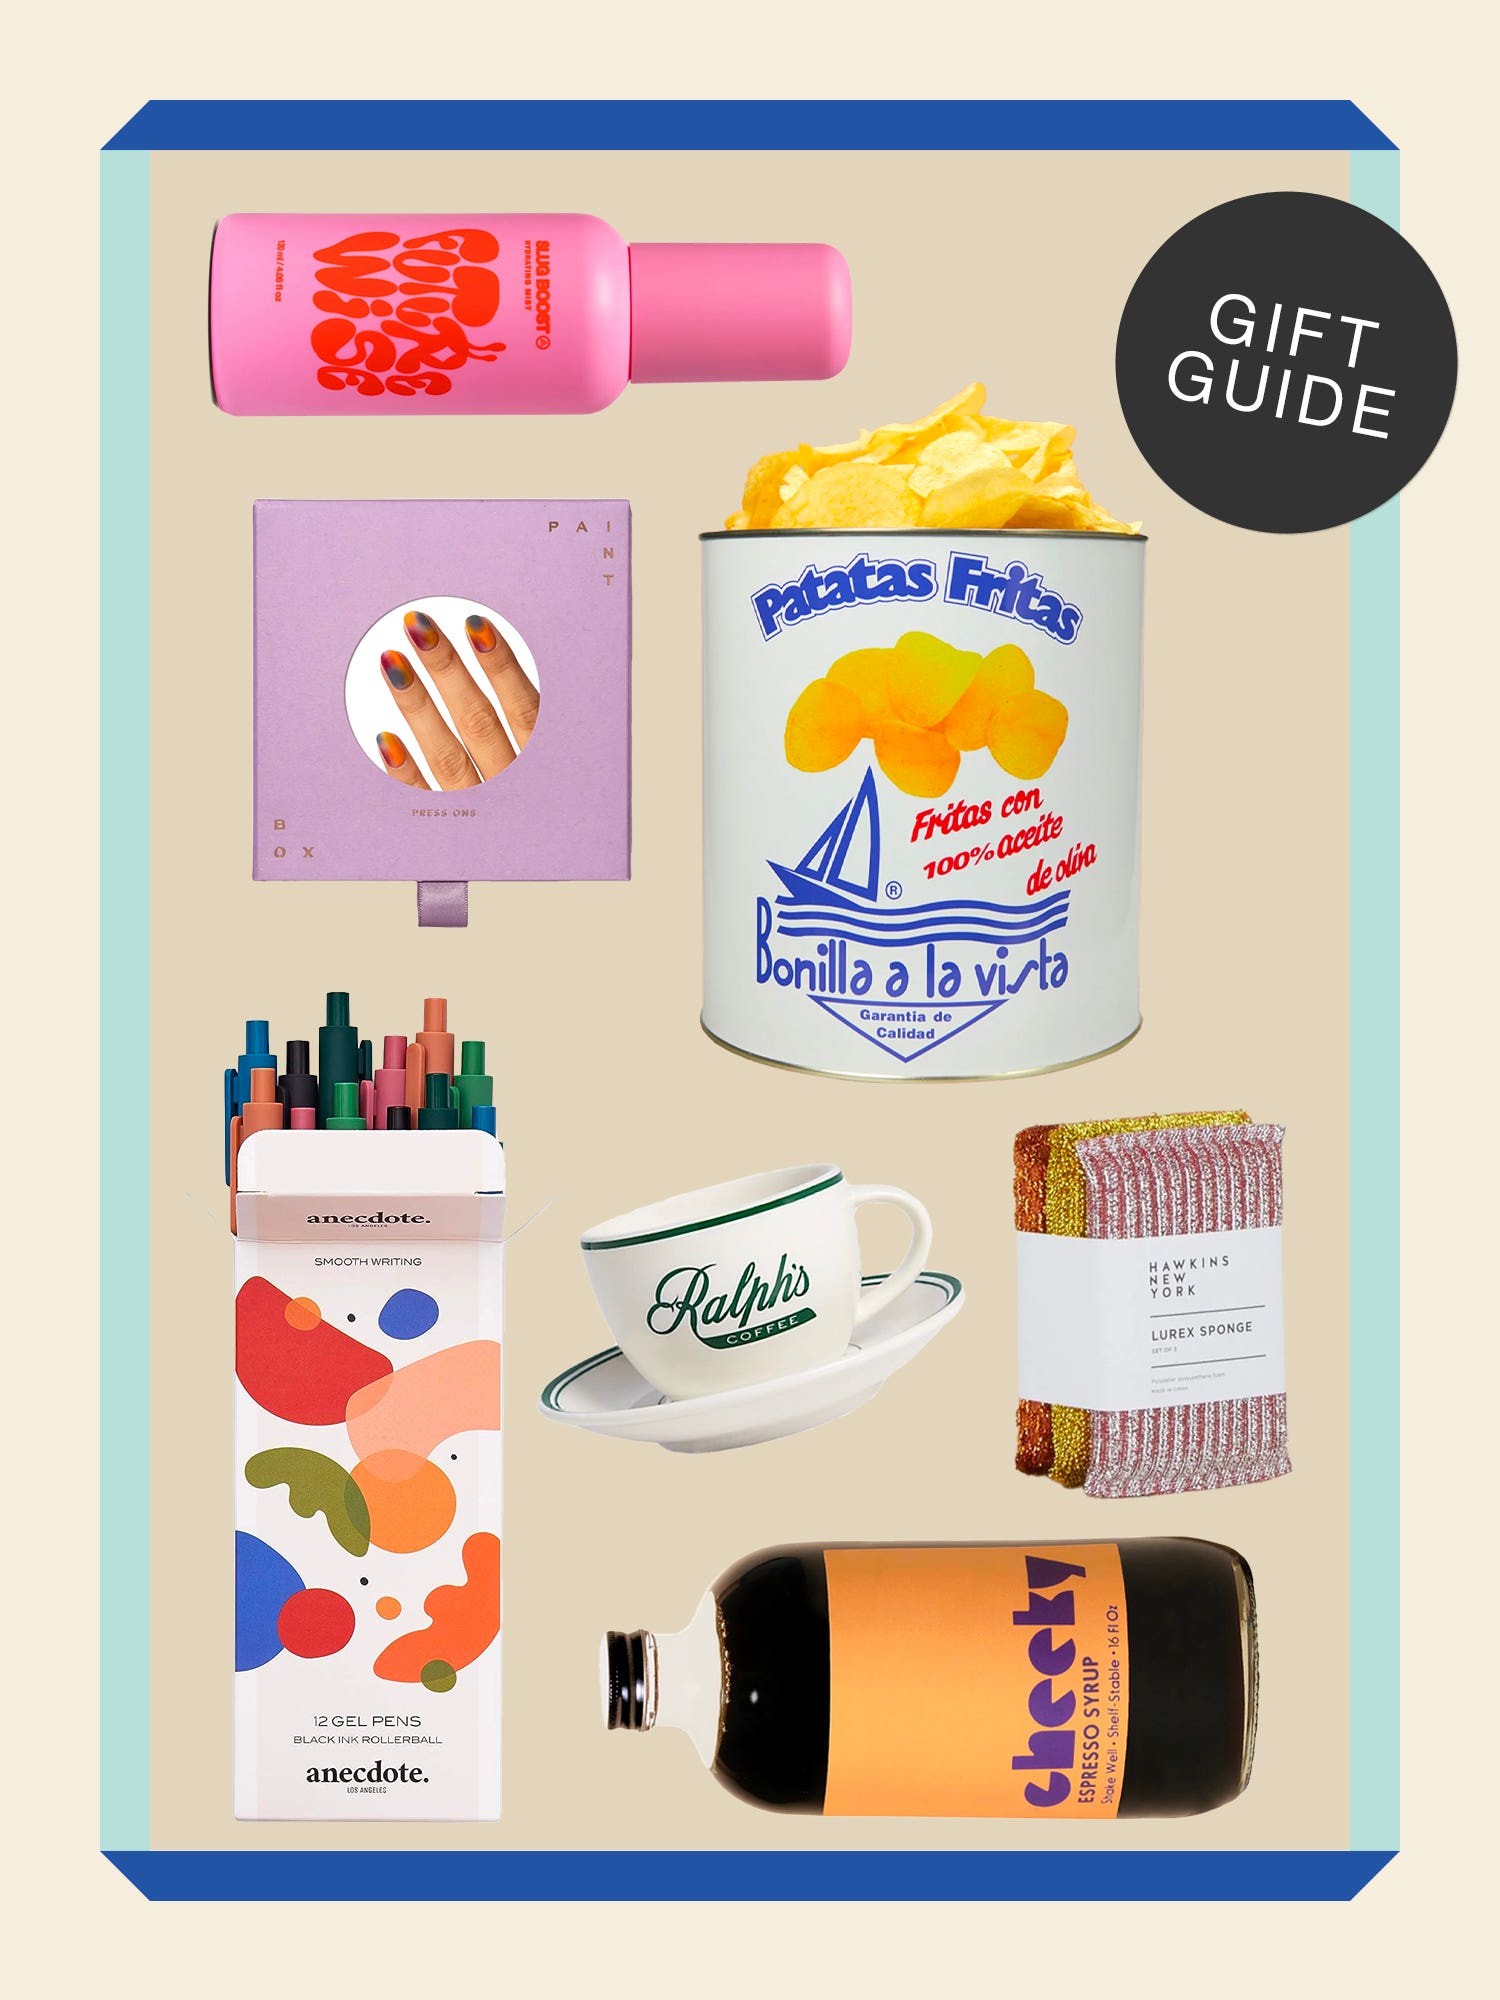 Secret Santa Gift Guide collage of products